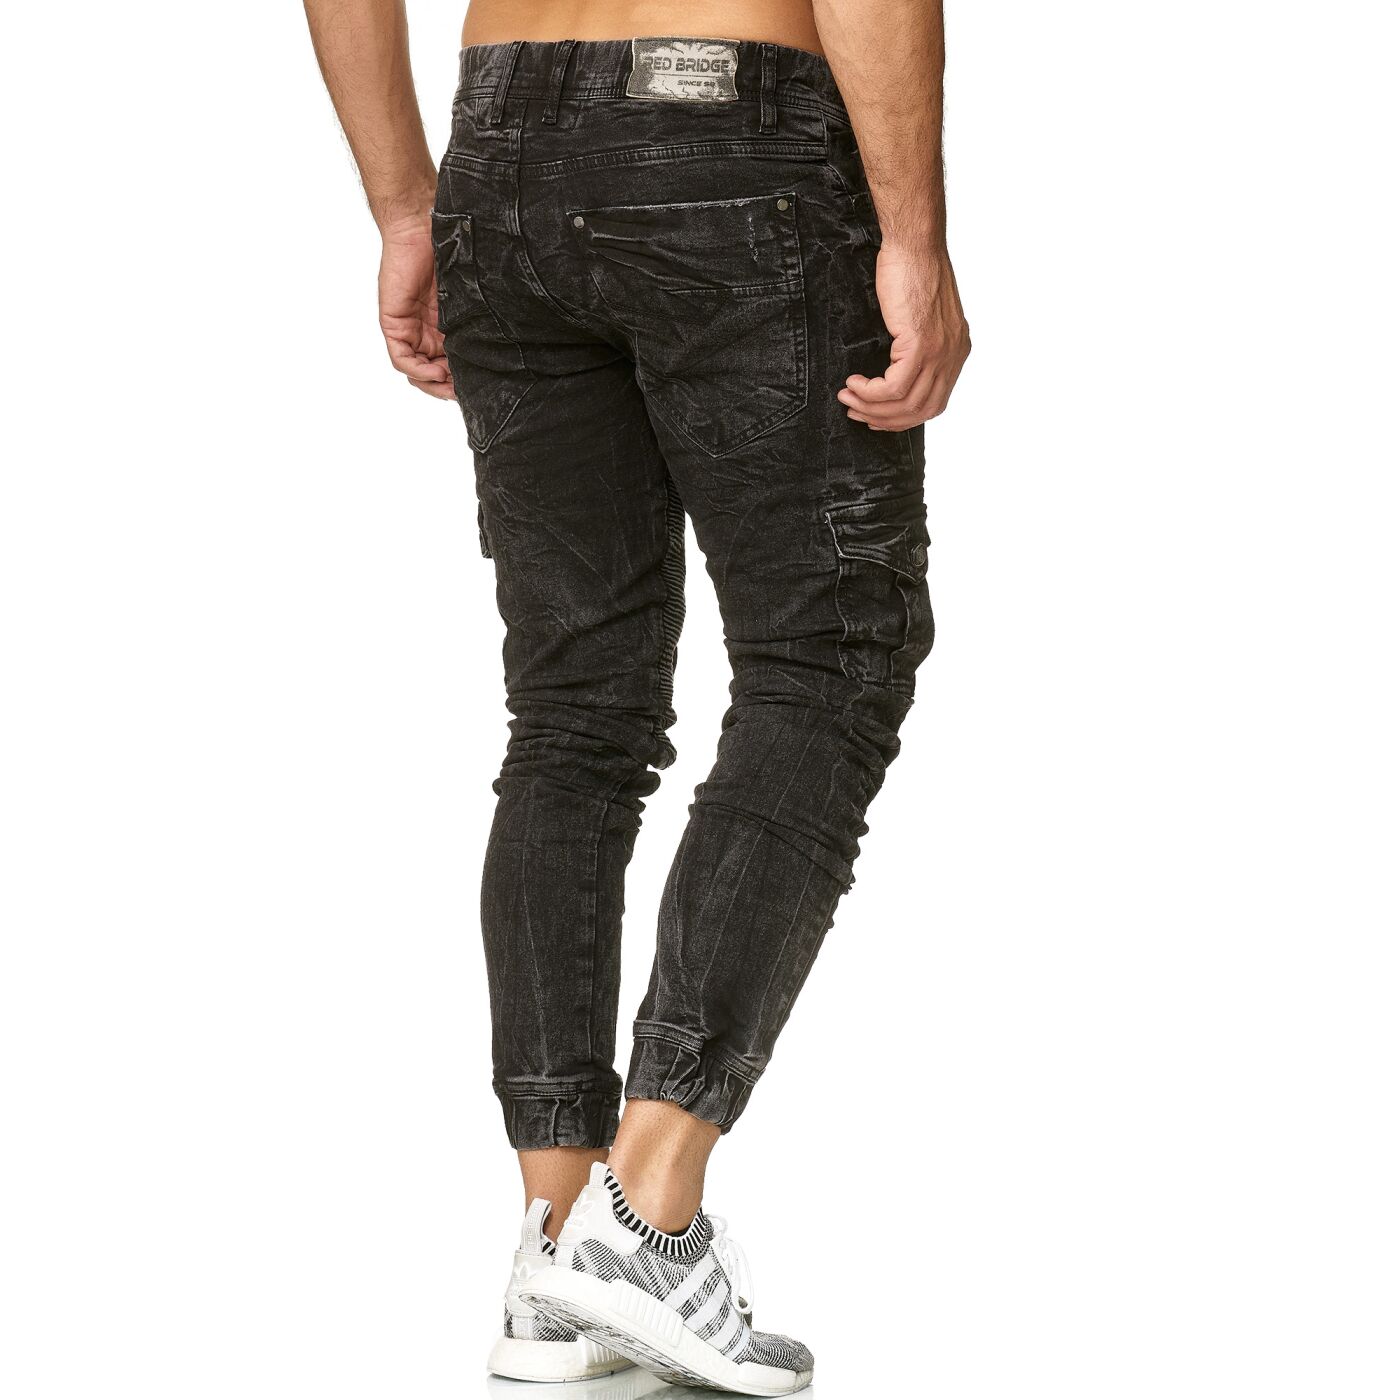 jeans with narrow ankle